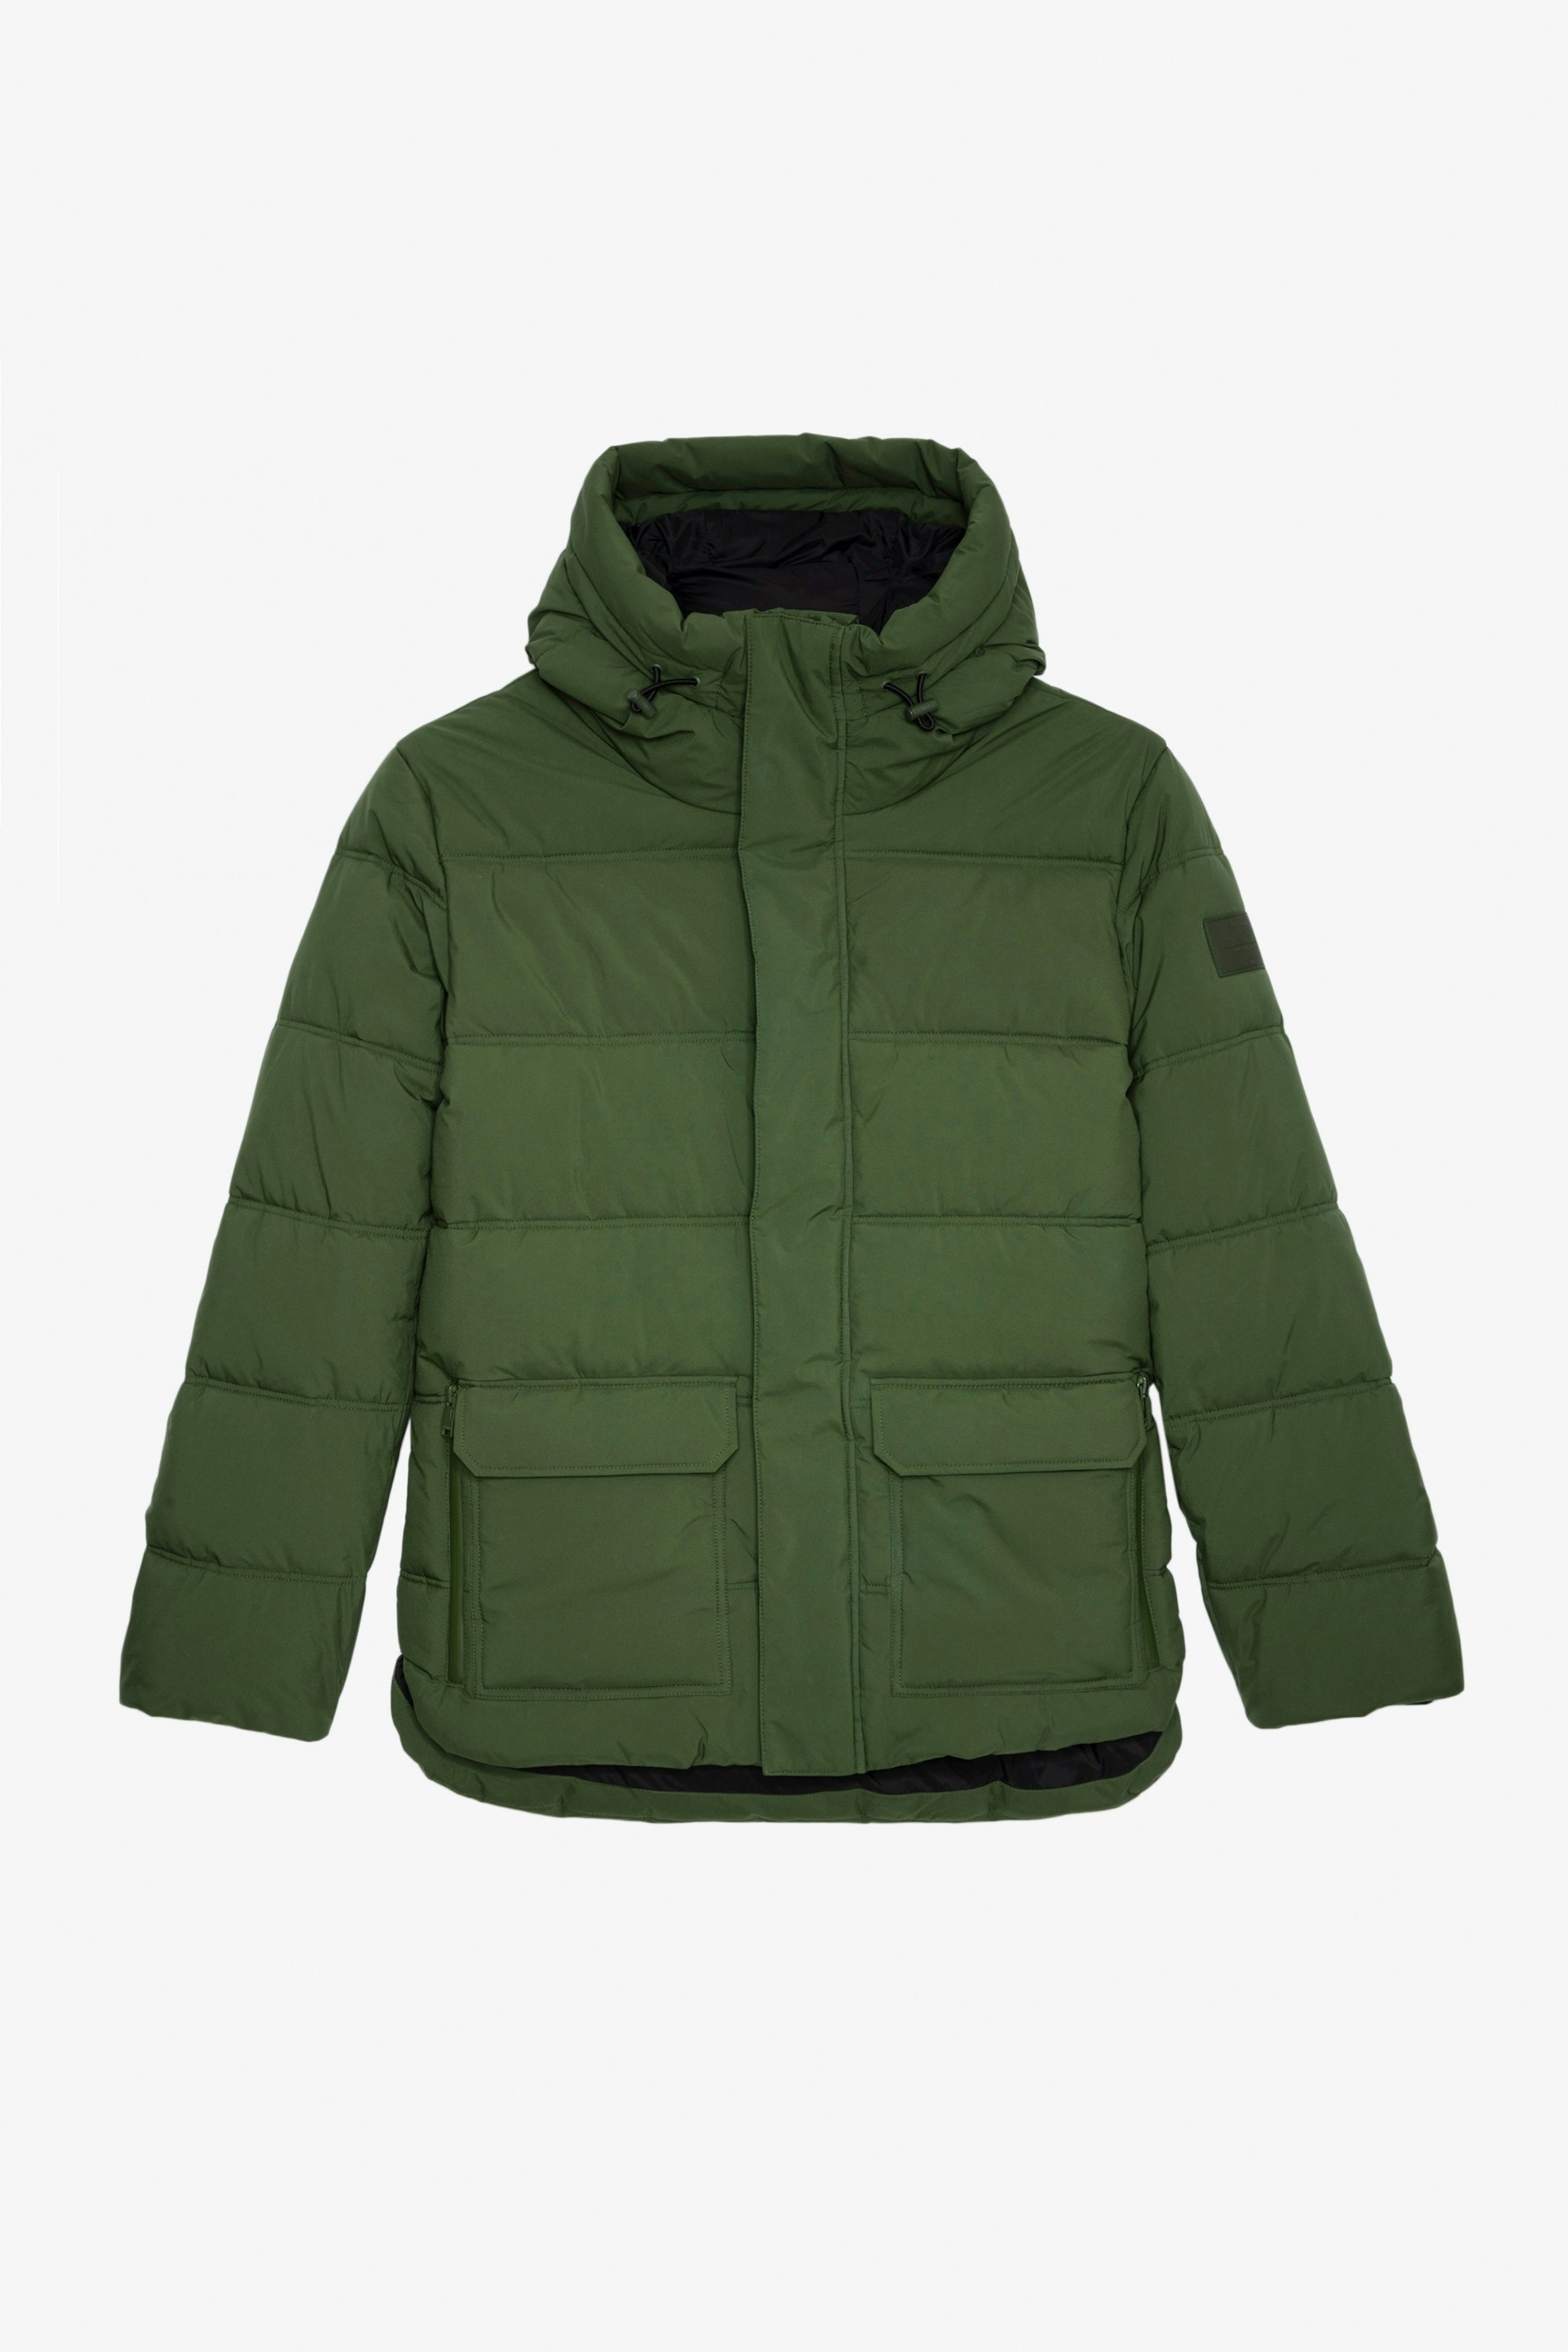 Bow Puffer Coat - Men’s green quilted hooded puffer coat with band and ZV badge.